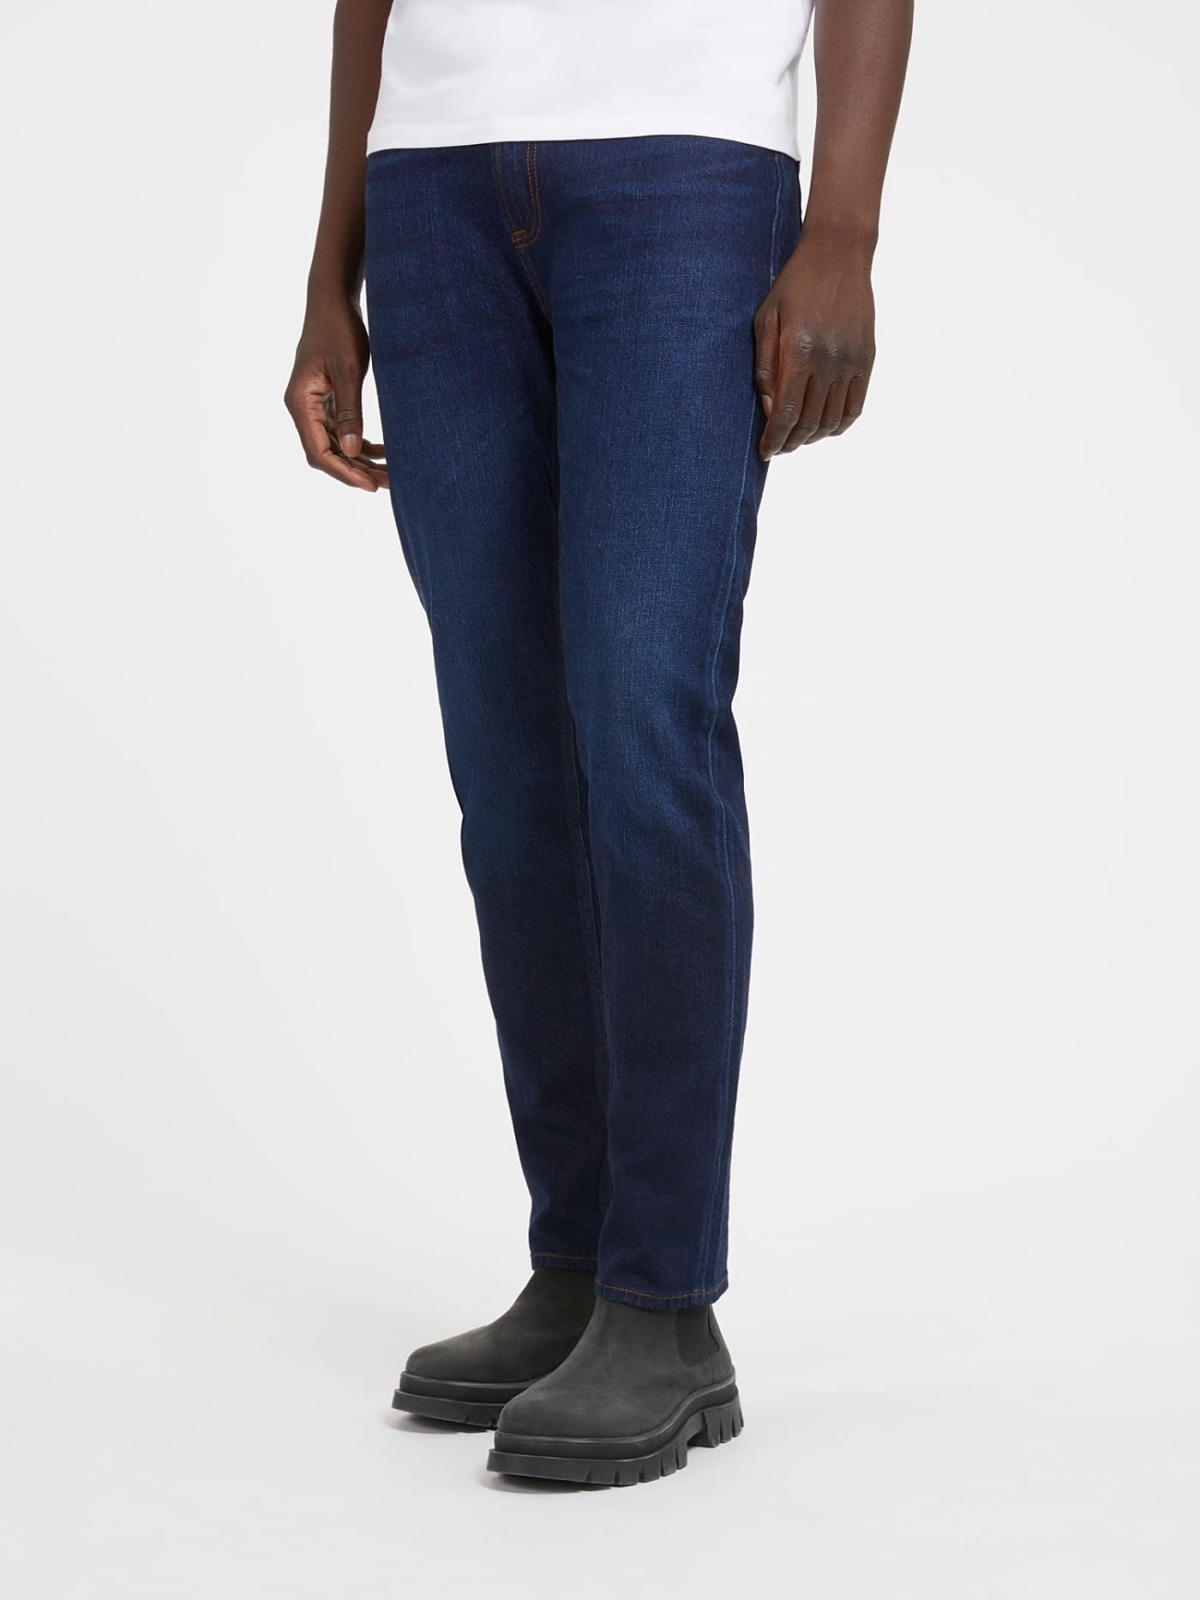 Guess Mens Blue Relaxed Jeans GOOFASH